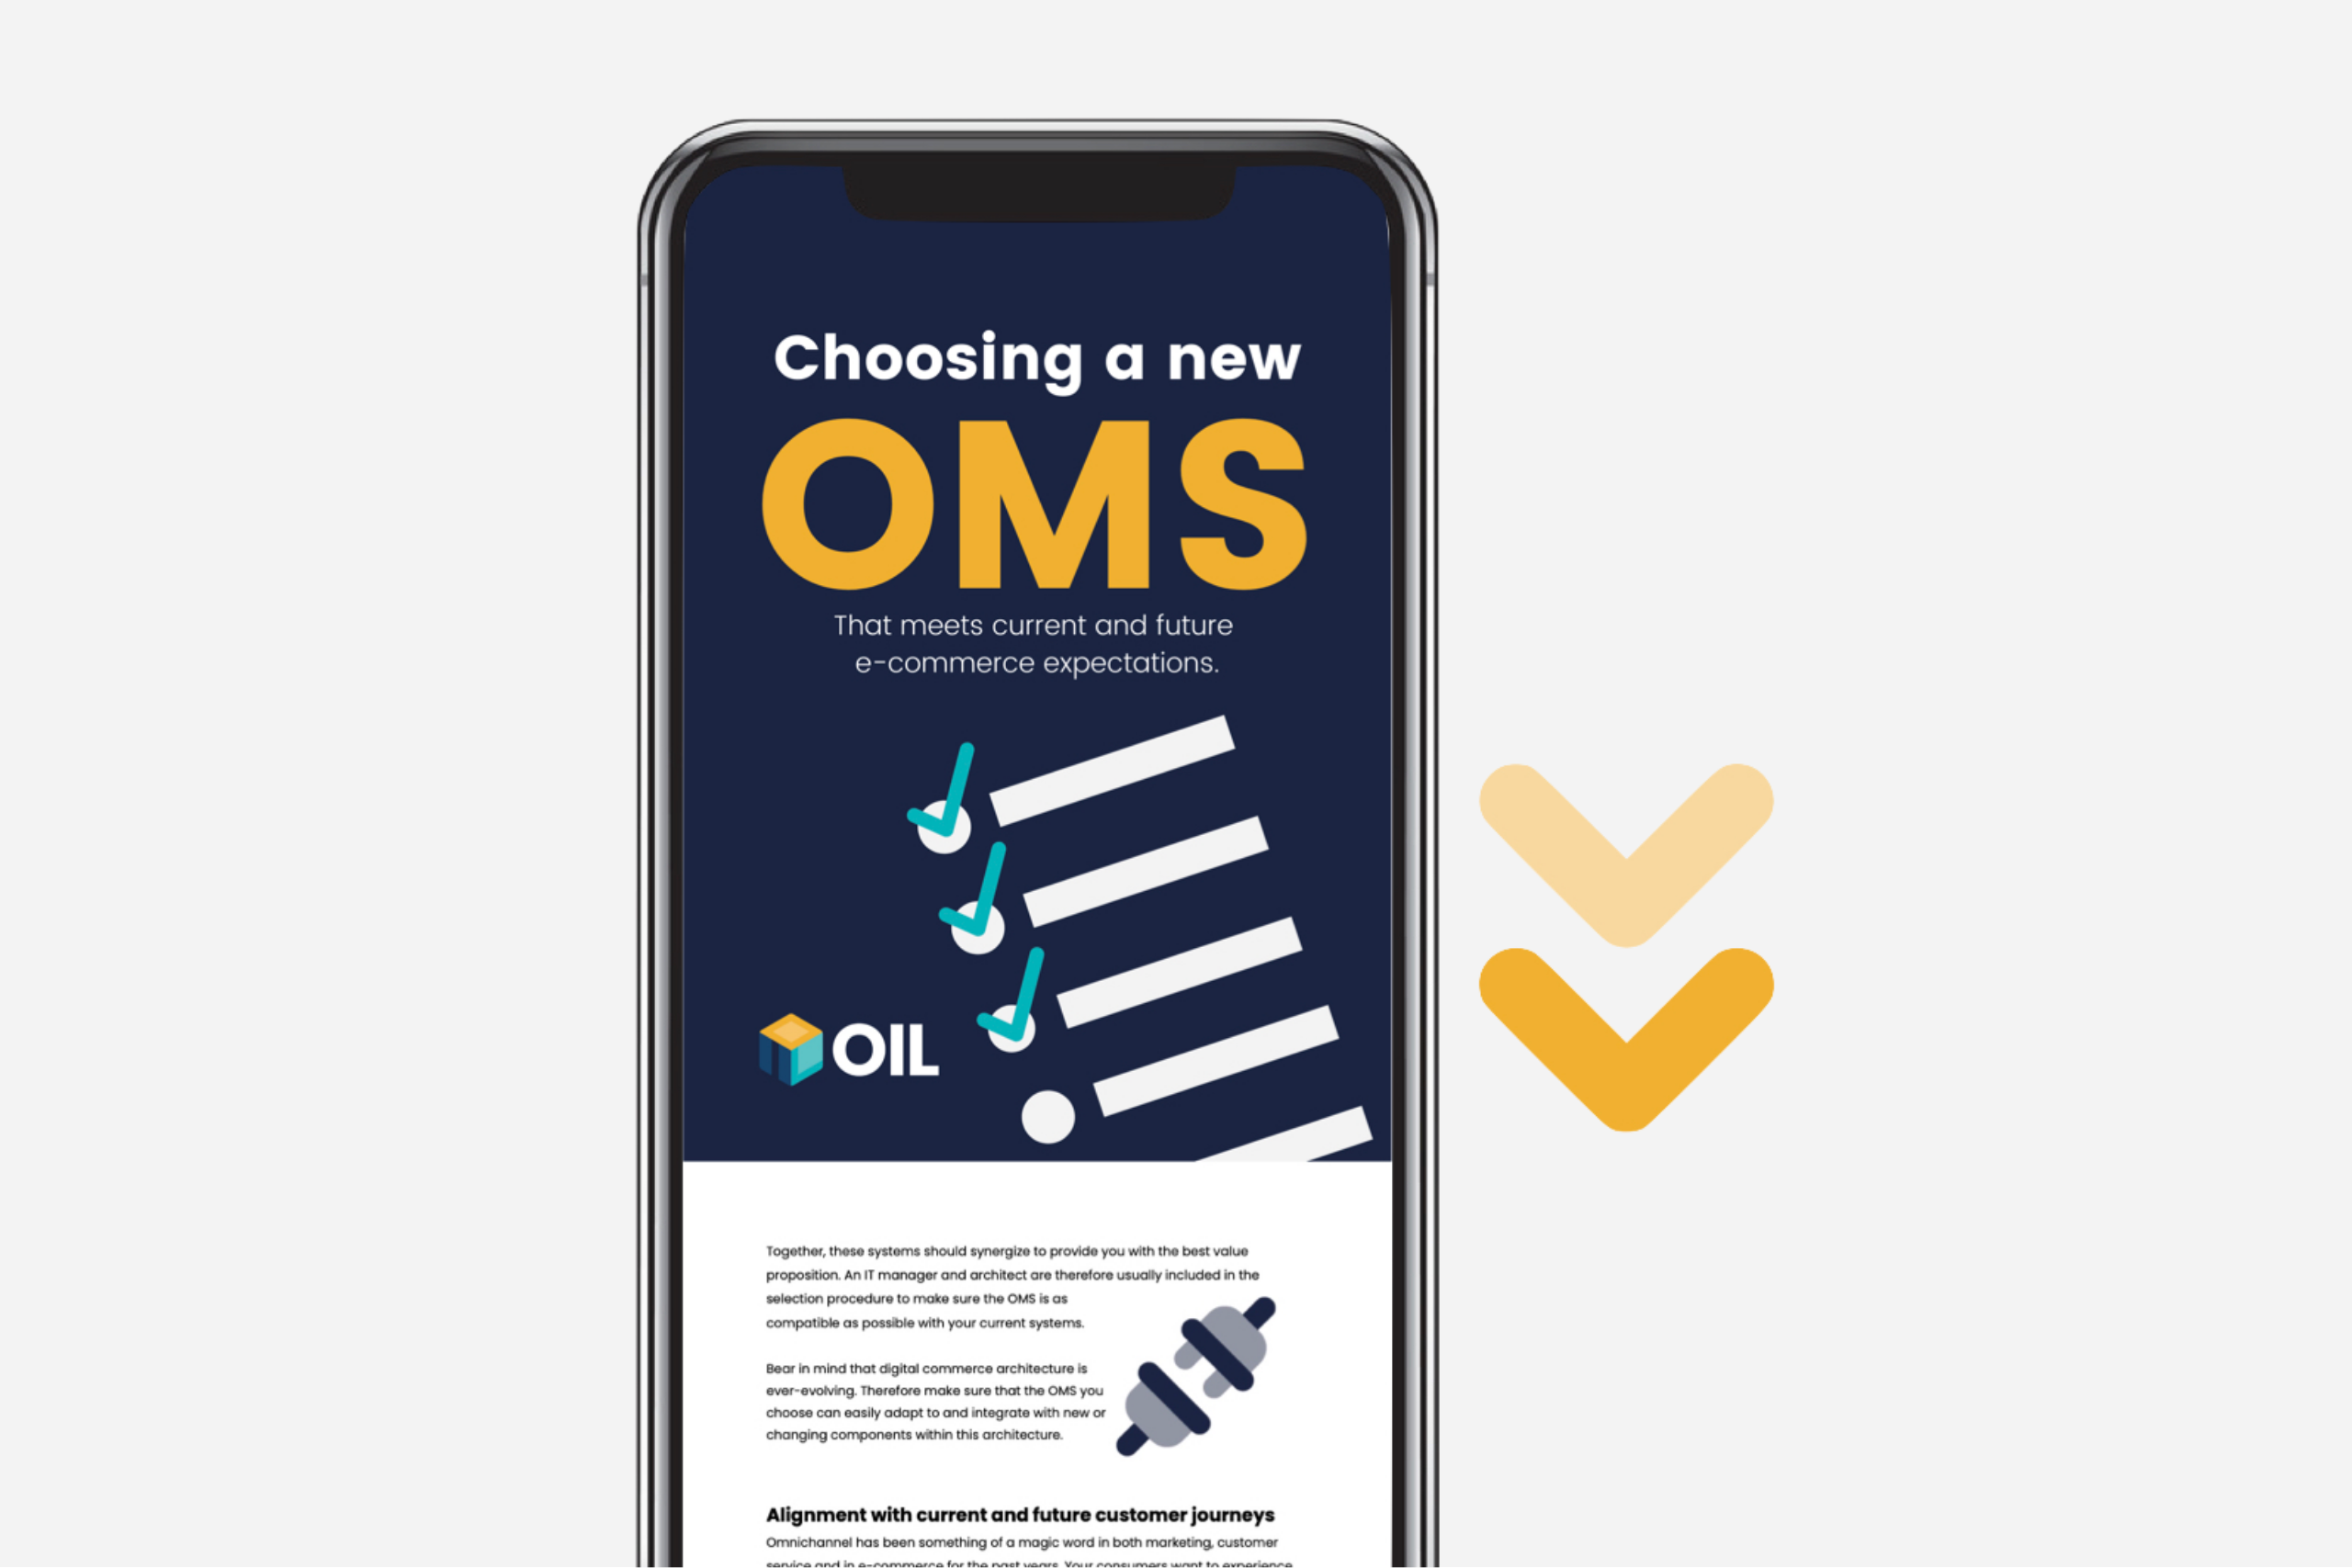 Download: choosing a new OMS